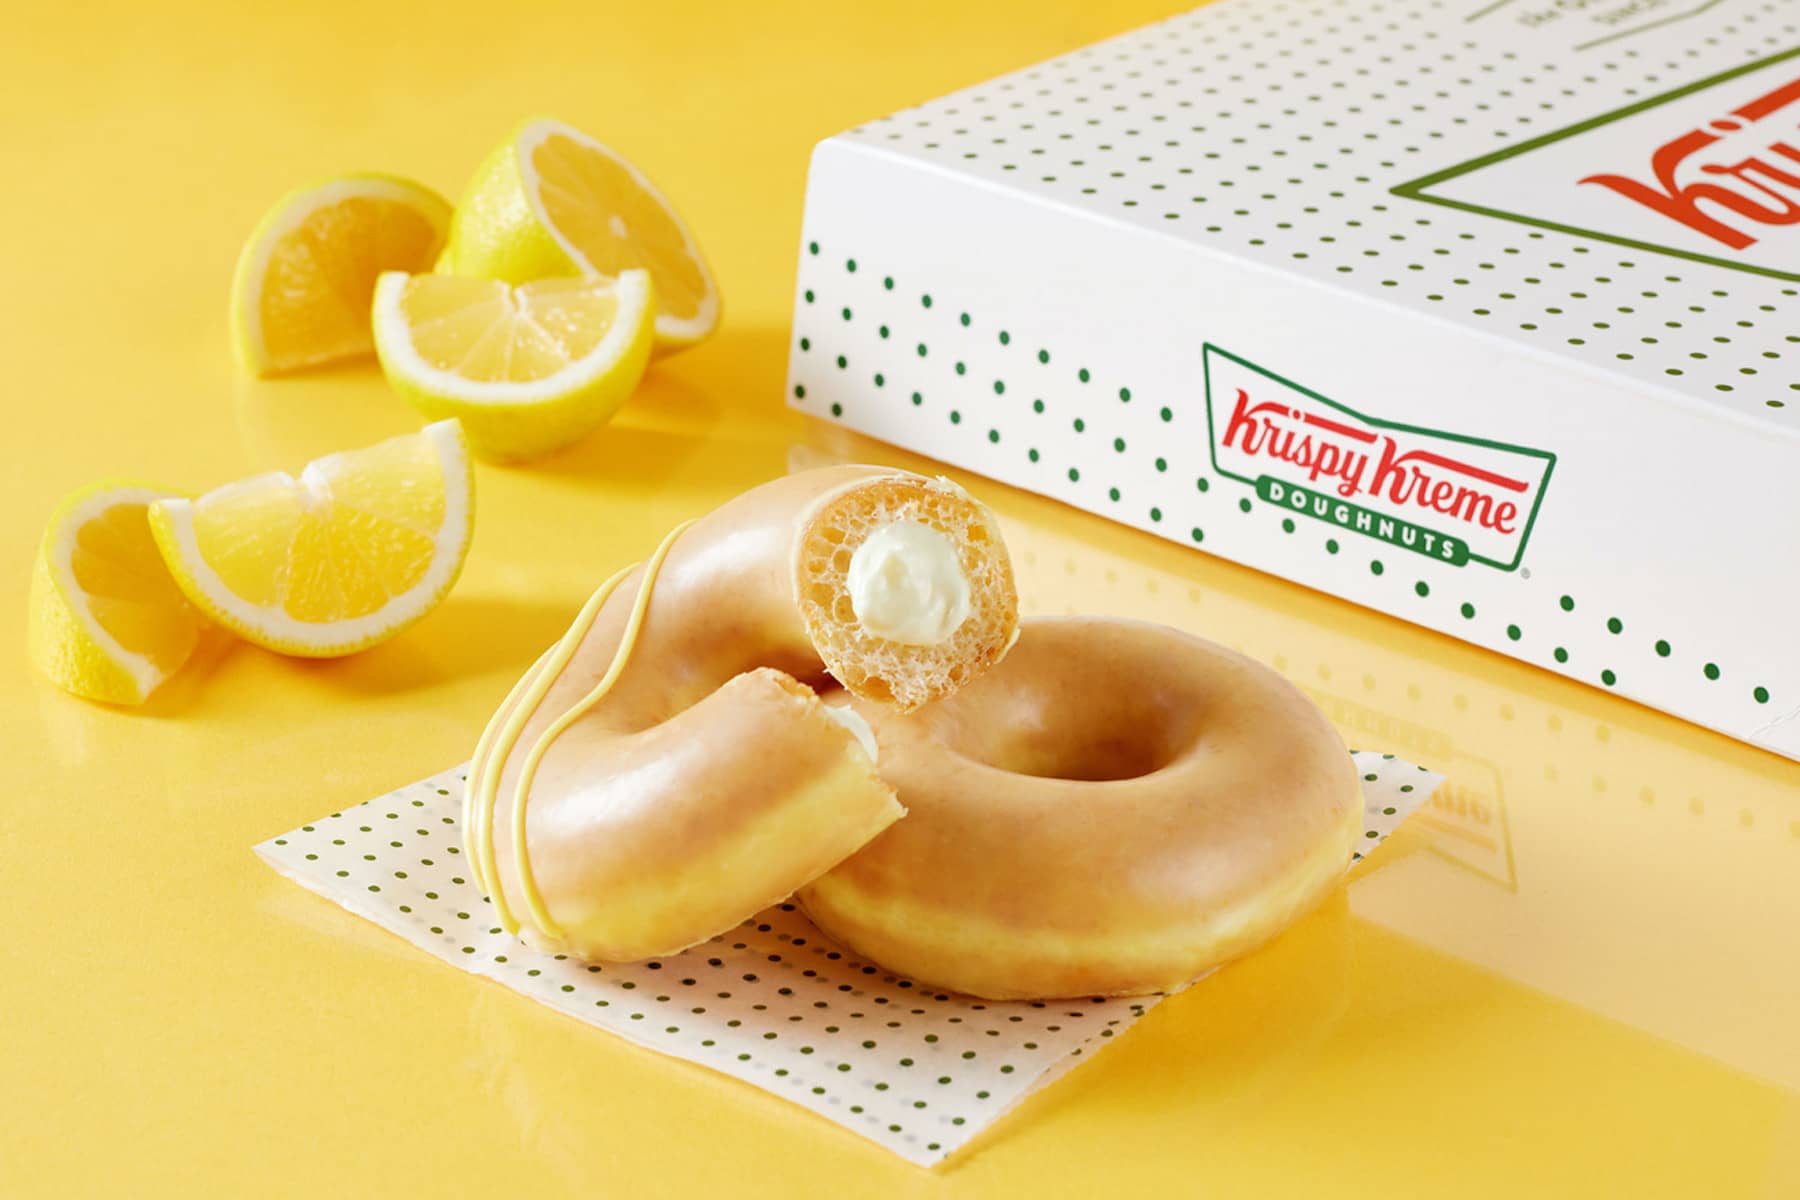 What is Commercial Photography - Product Photography - Krispy Kreme Donuts